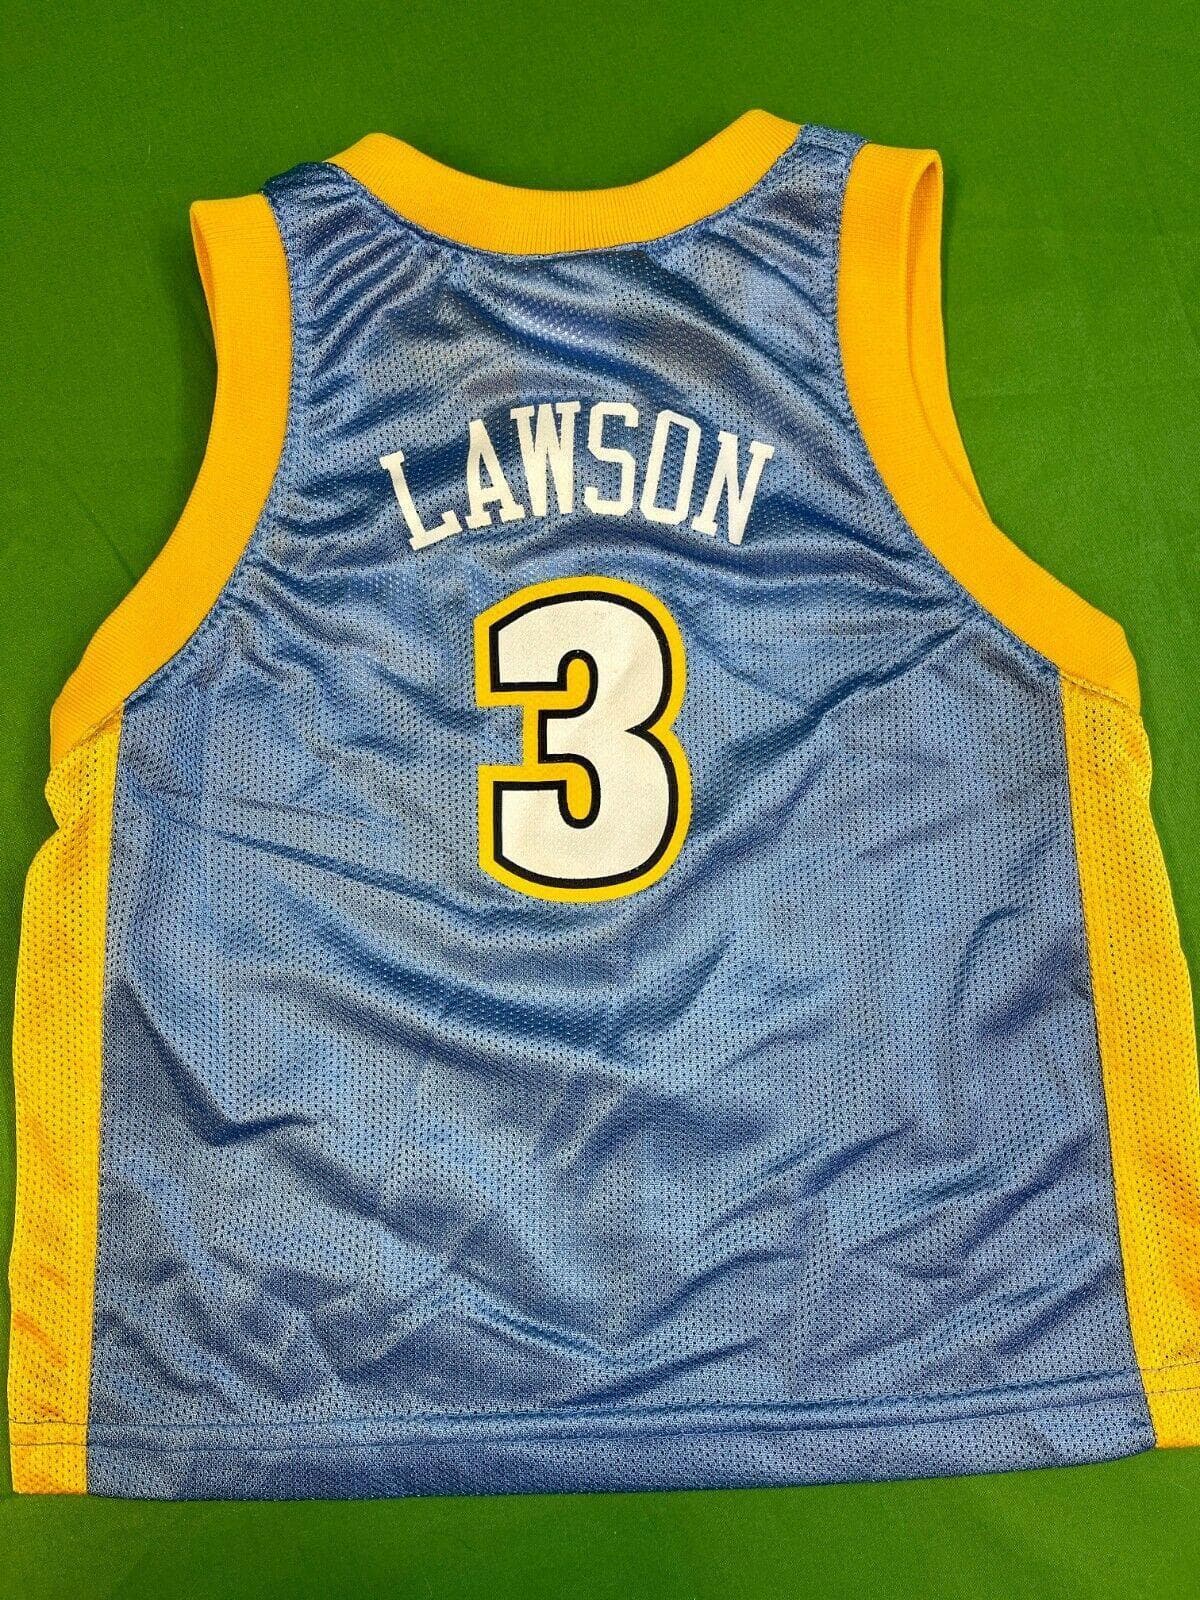 ty lawson nuggets jersey